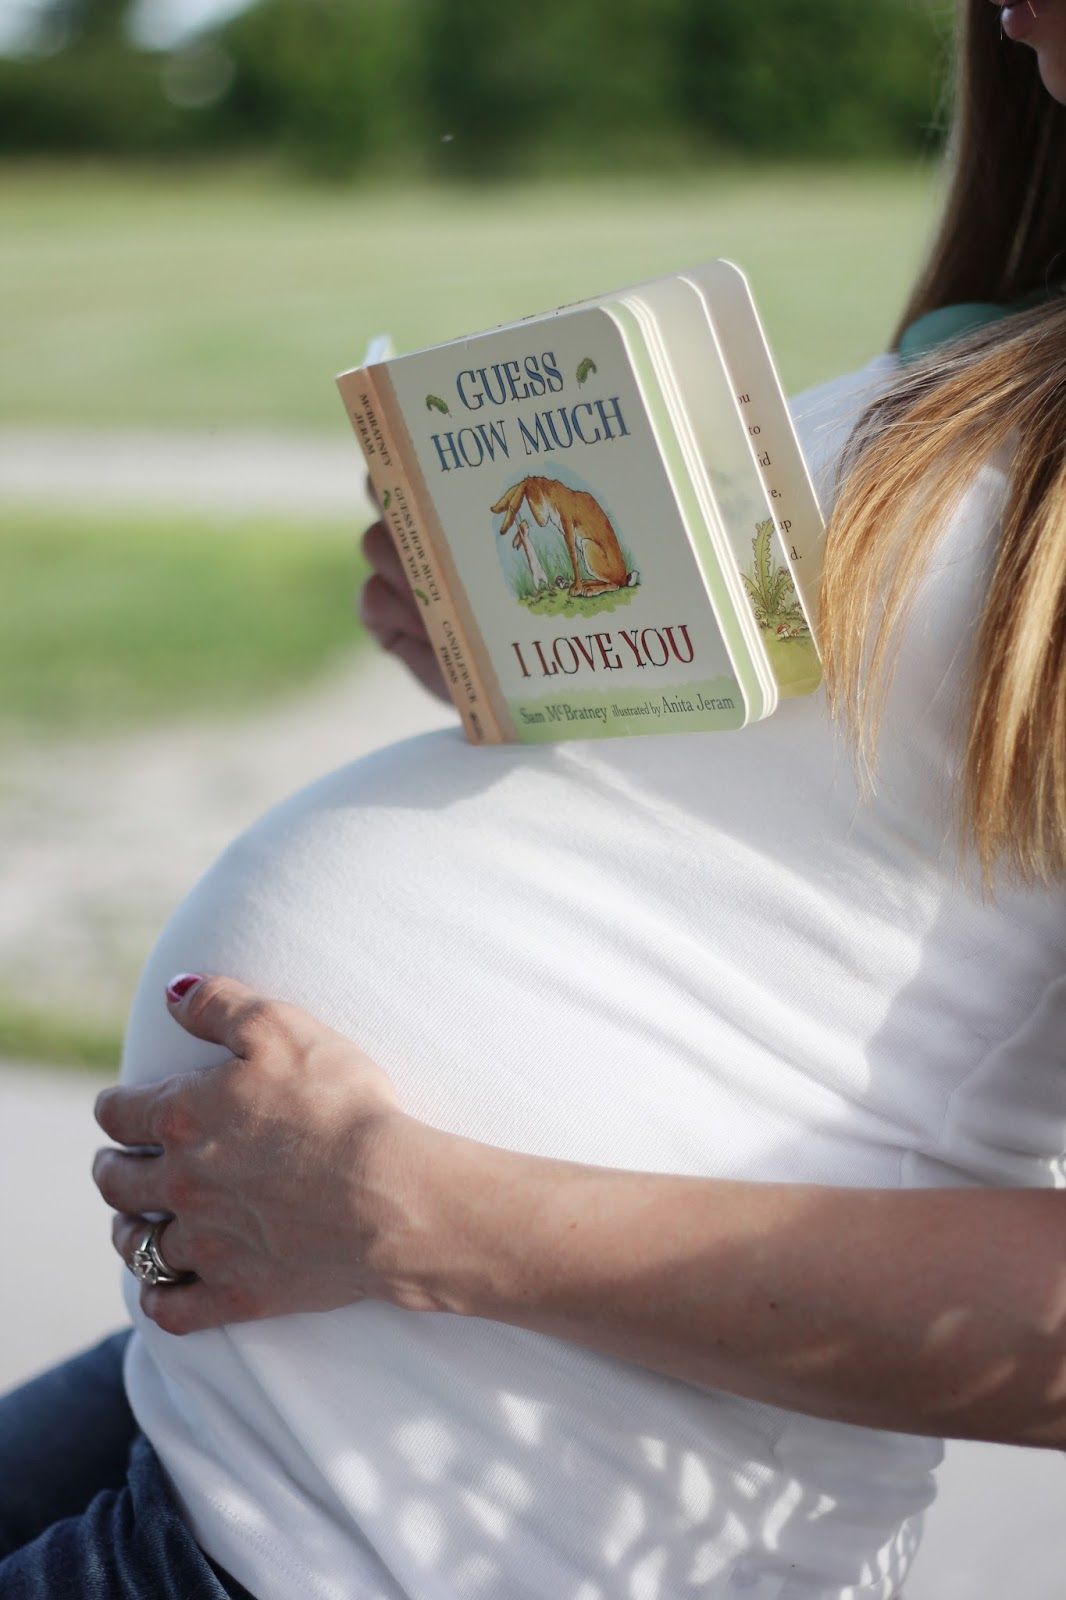 I love the idea of taking maternity shot pictures with books – especially since thats my most requested item for baby: books!